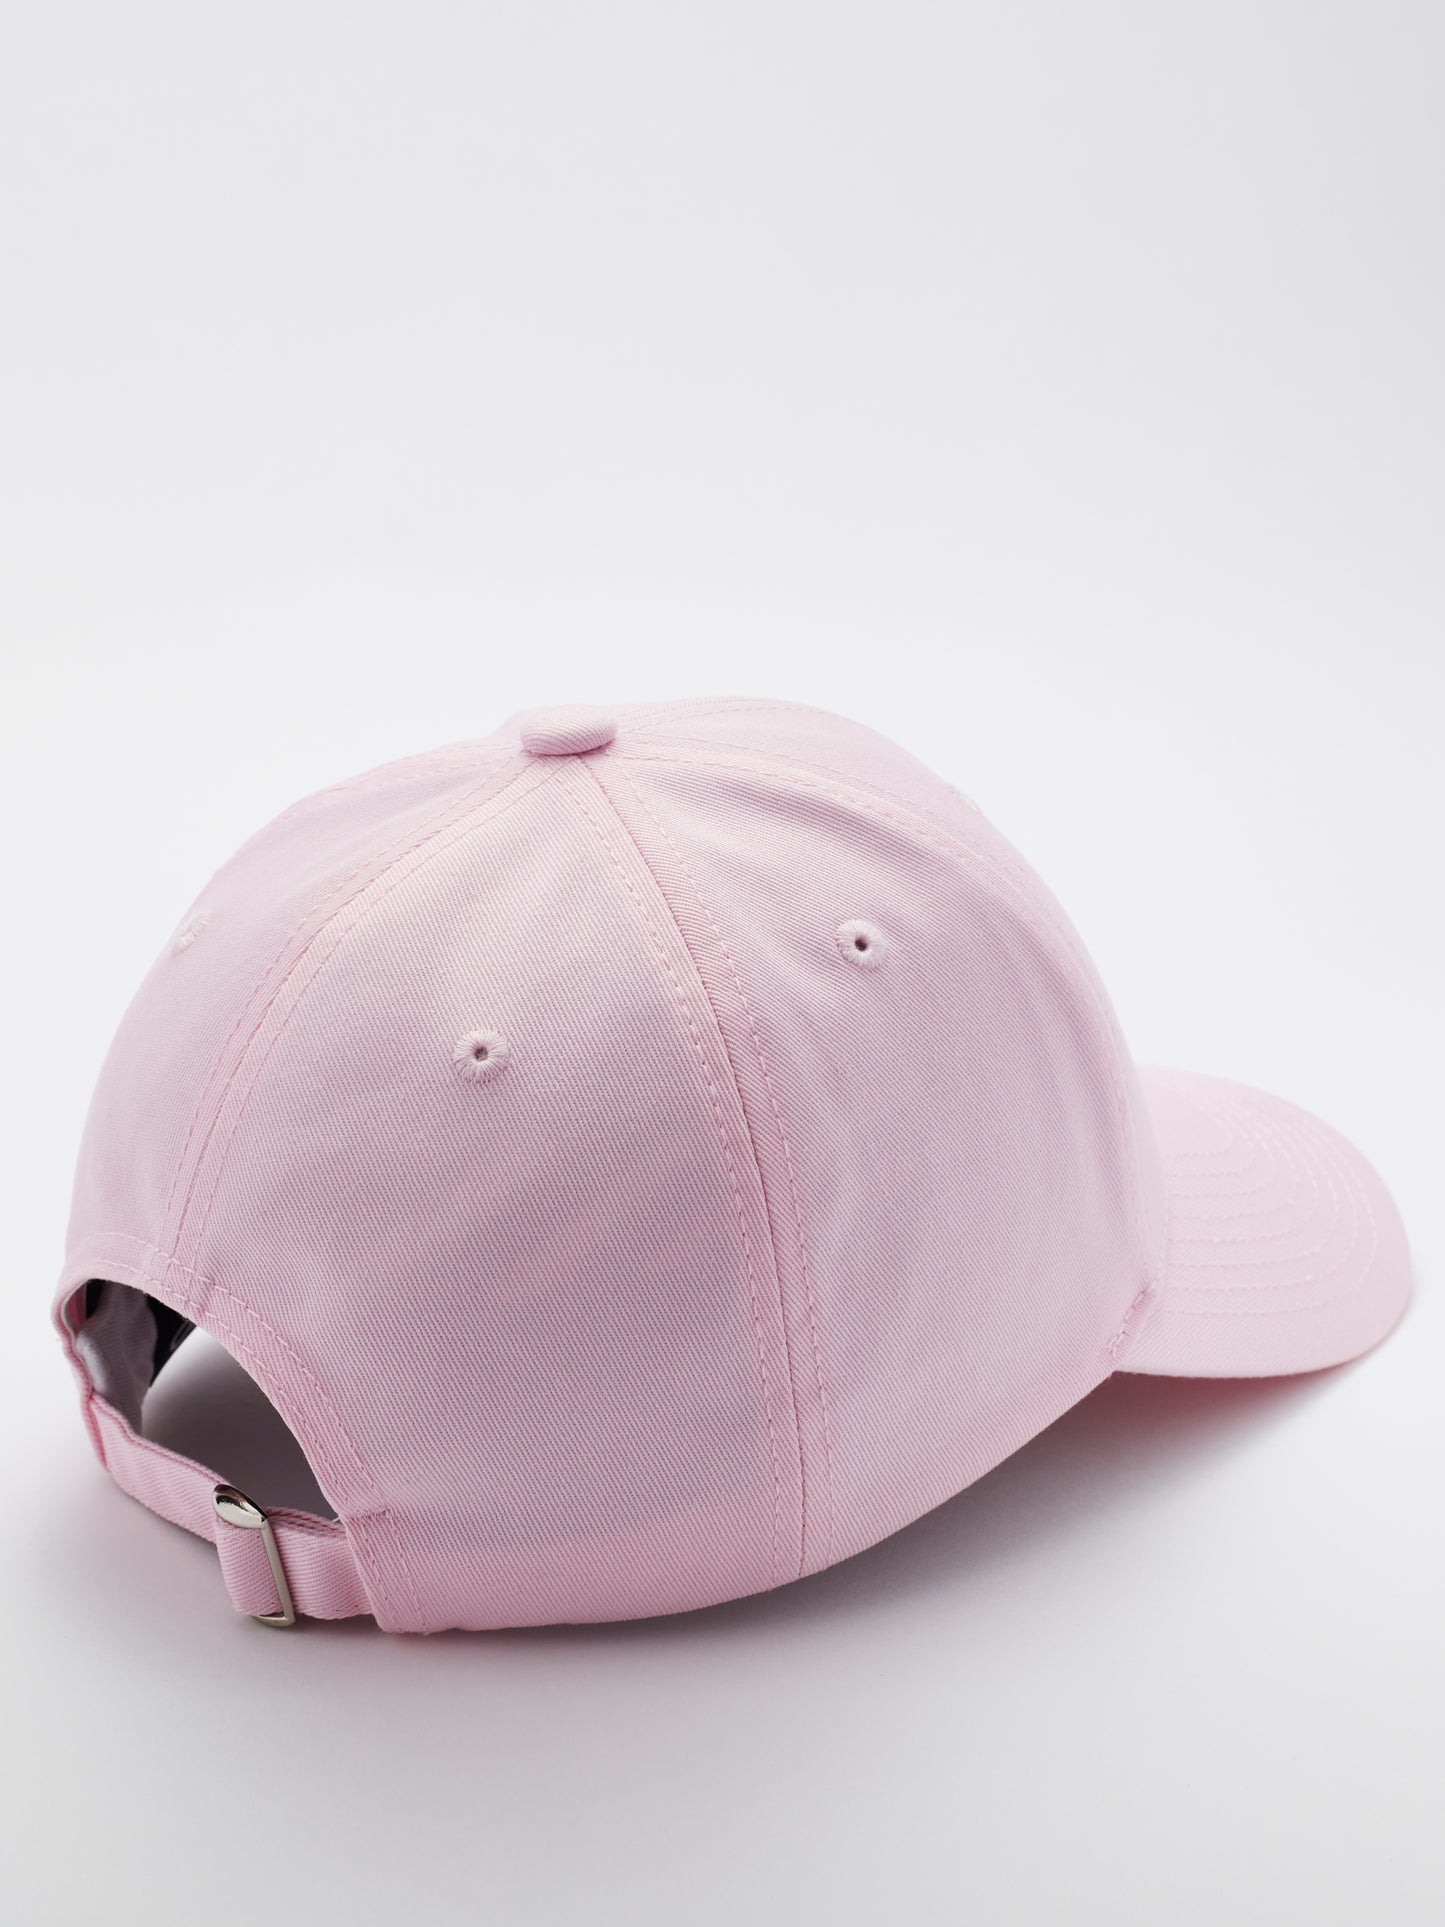 Load image into Gallery viewer, MOOD Brand - Flying Ghost baseball cap in pink color - back view
